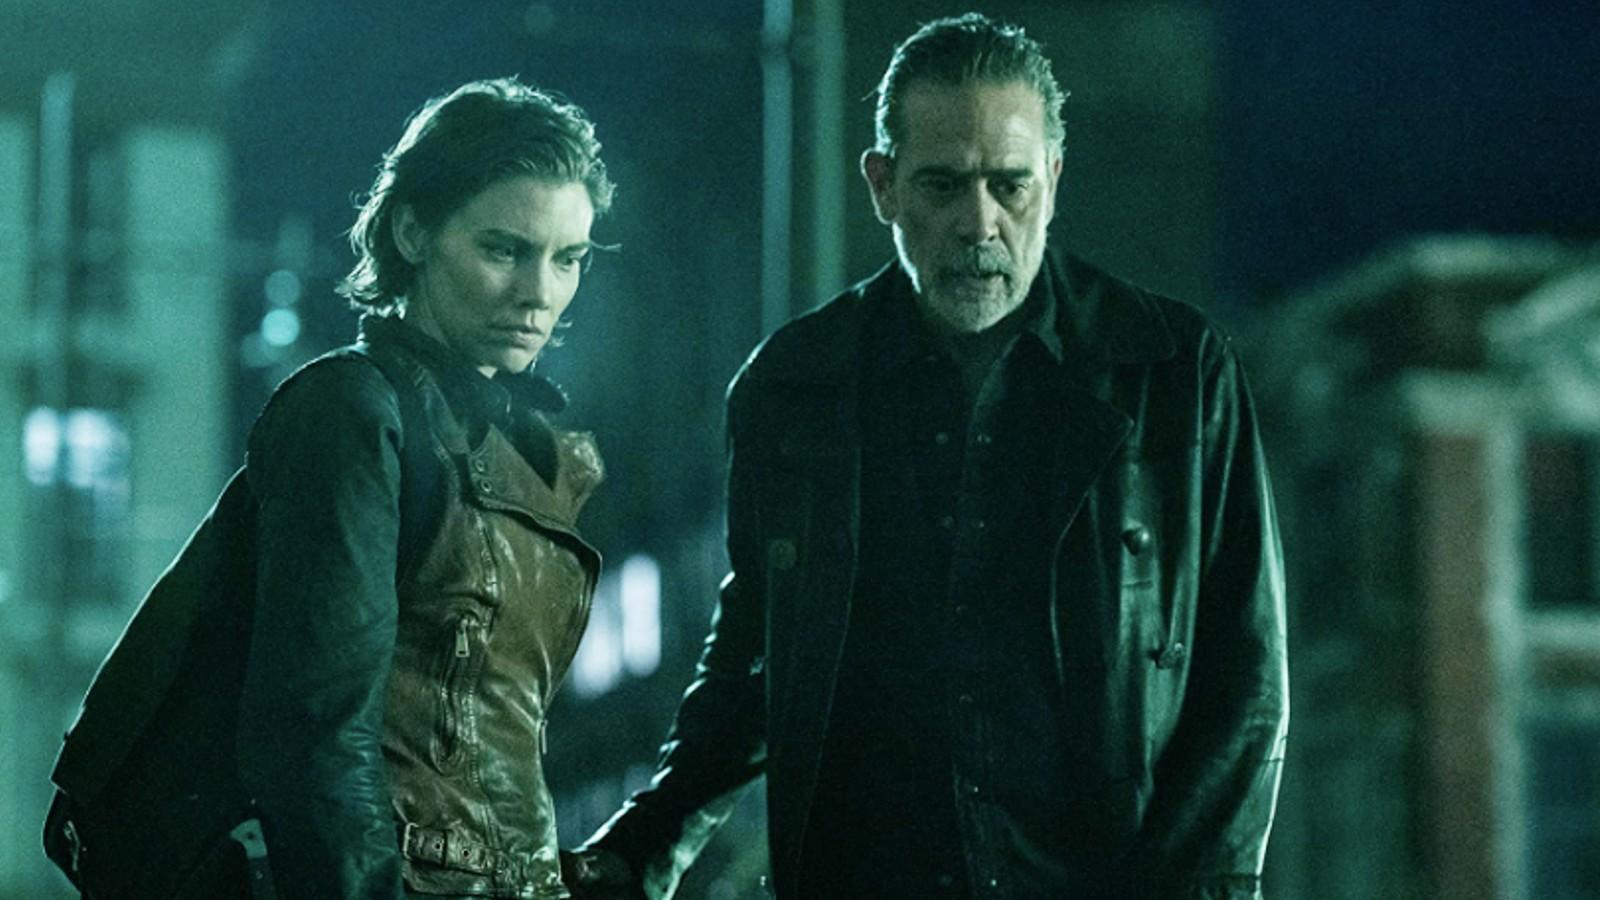 Maggie and Negan look down at something in The Walking Dead: Dead City